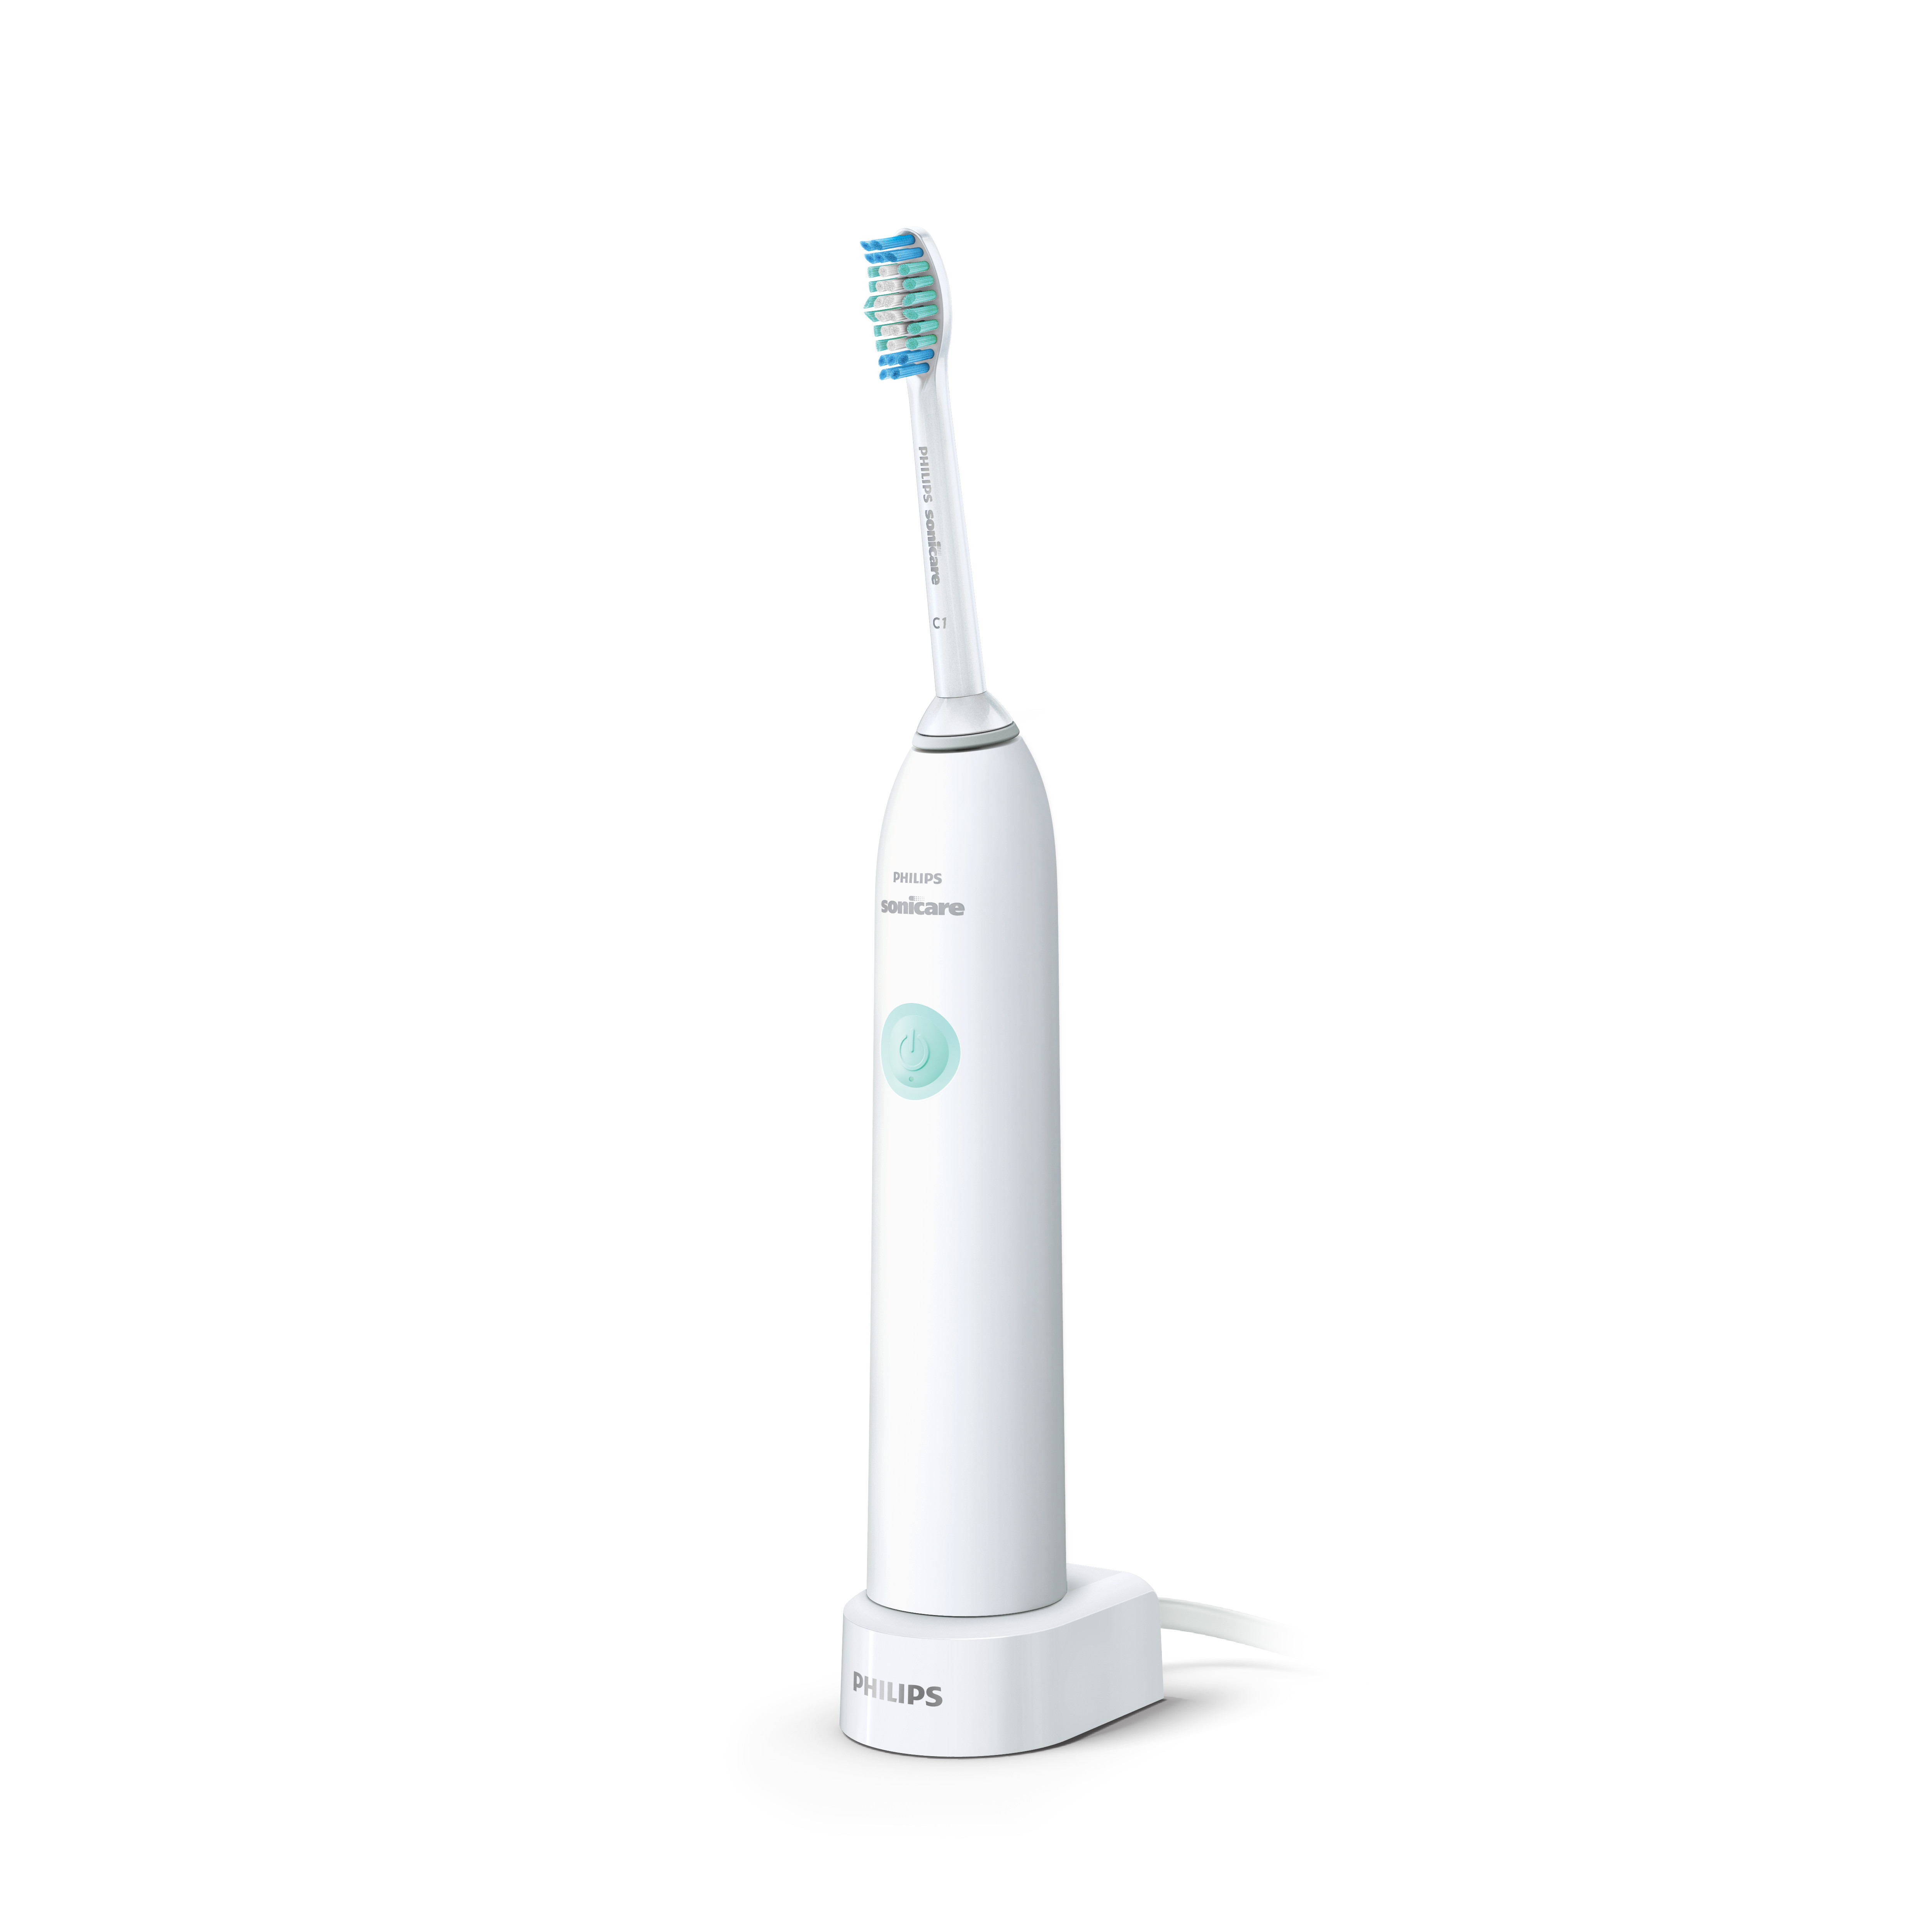 Philips Sonicare Dailyclean 1100 Rechargeable Electric Toothbrush, White HX3411/05 - image 4 of 10